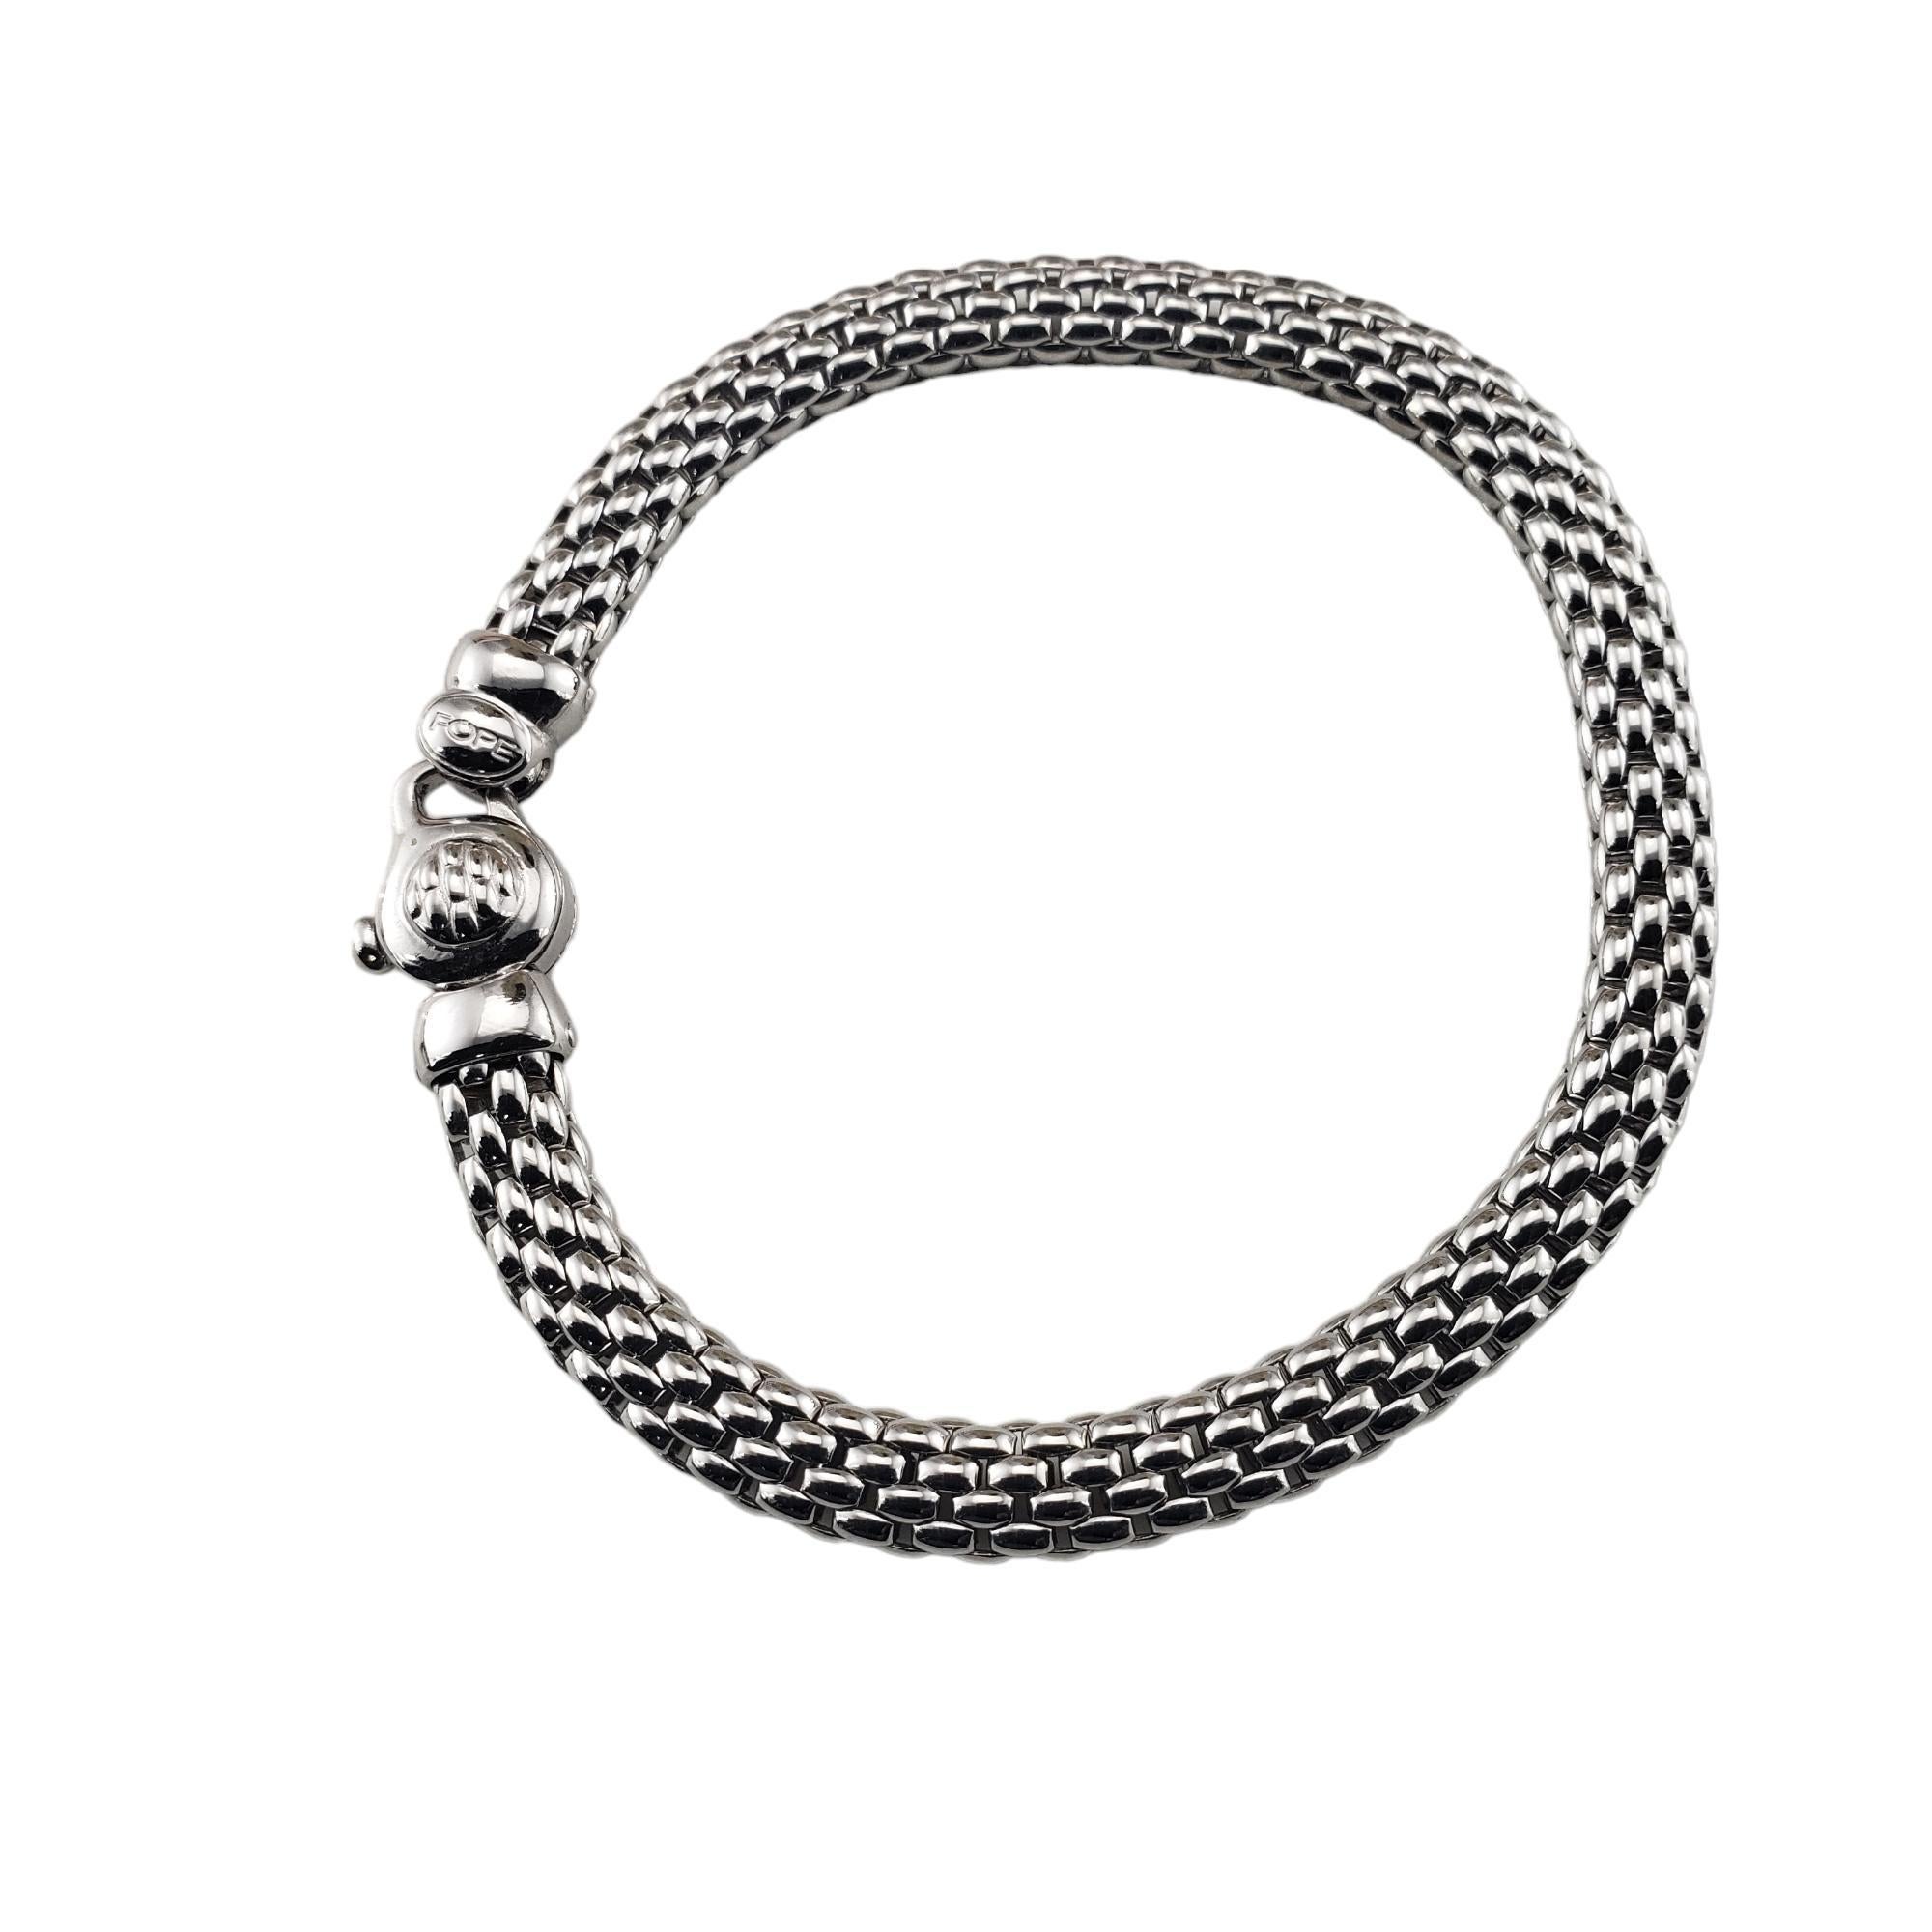 Vintage Fope Vendome 18 Karat White Gold Flexible Bracelet-

This elegant flexible bracelet from the Vendome collection by Fope  is crafted in meticulously detailed 18K white gold.  Width:  6 mm.

Size: 7 inches

Hallmark:  750  Fope  Italy 